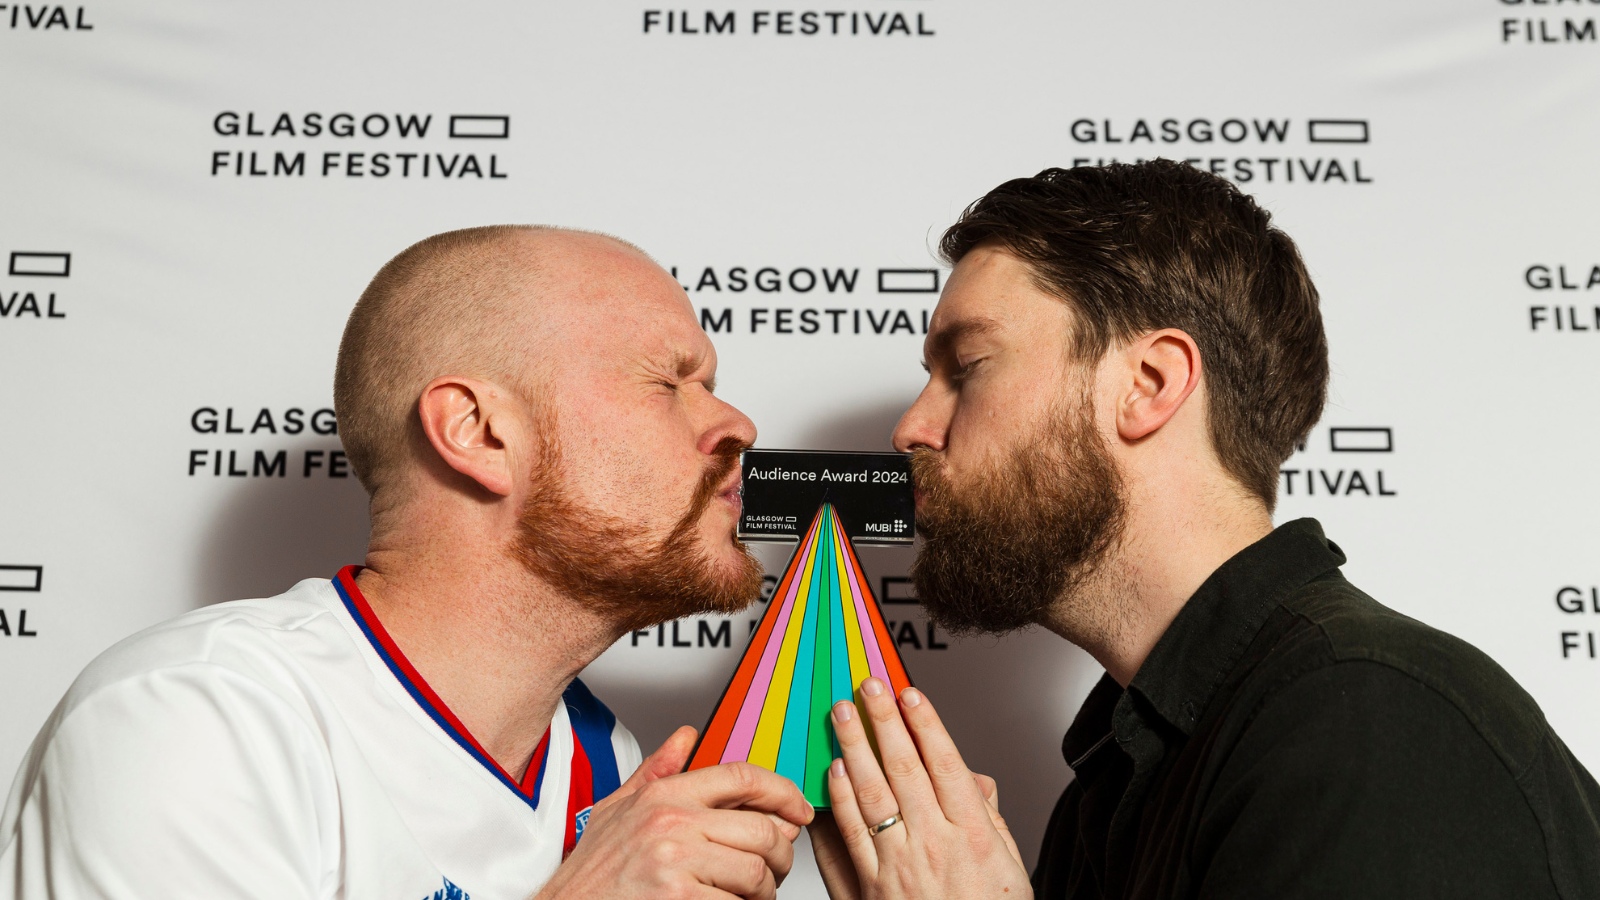 Winners of the Glasgow Film Festival Audience Award Kari Vidarsson and Smari Gunn kiss either side of the award as they hold it between them